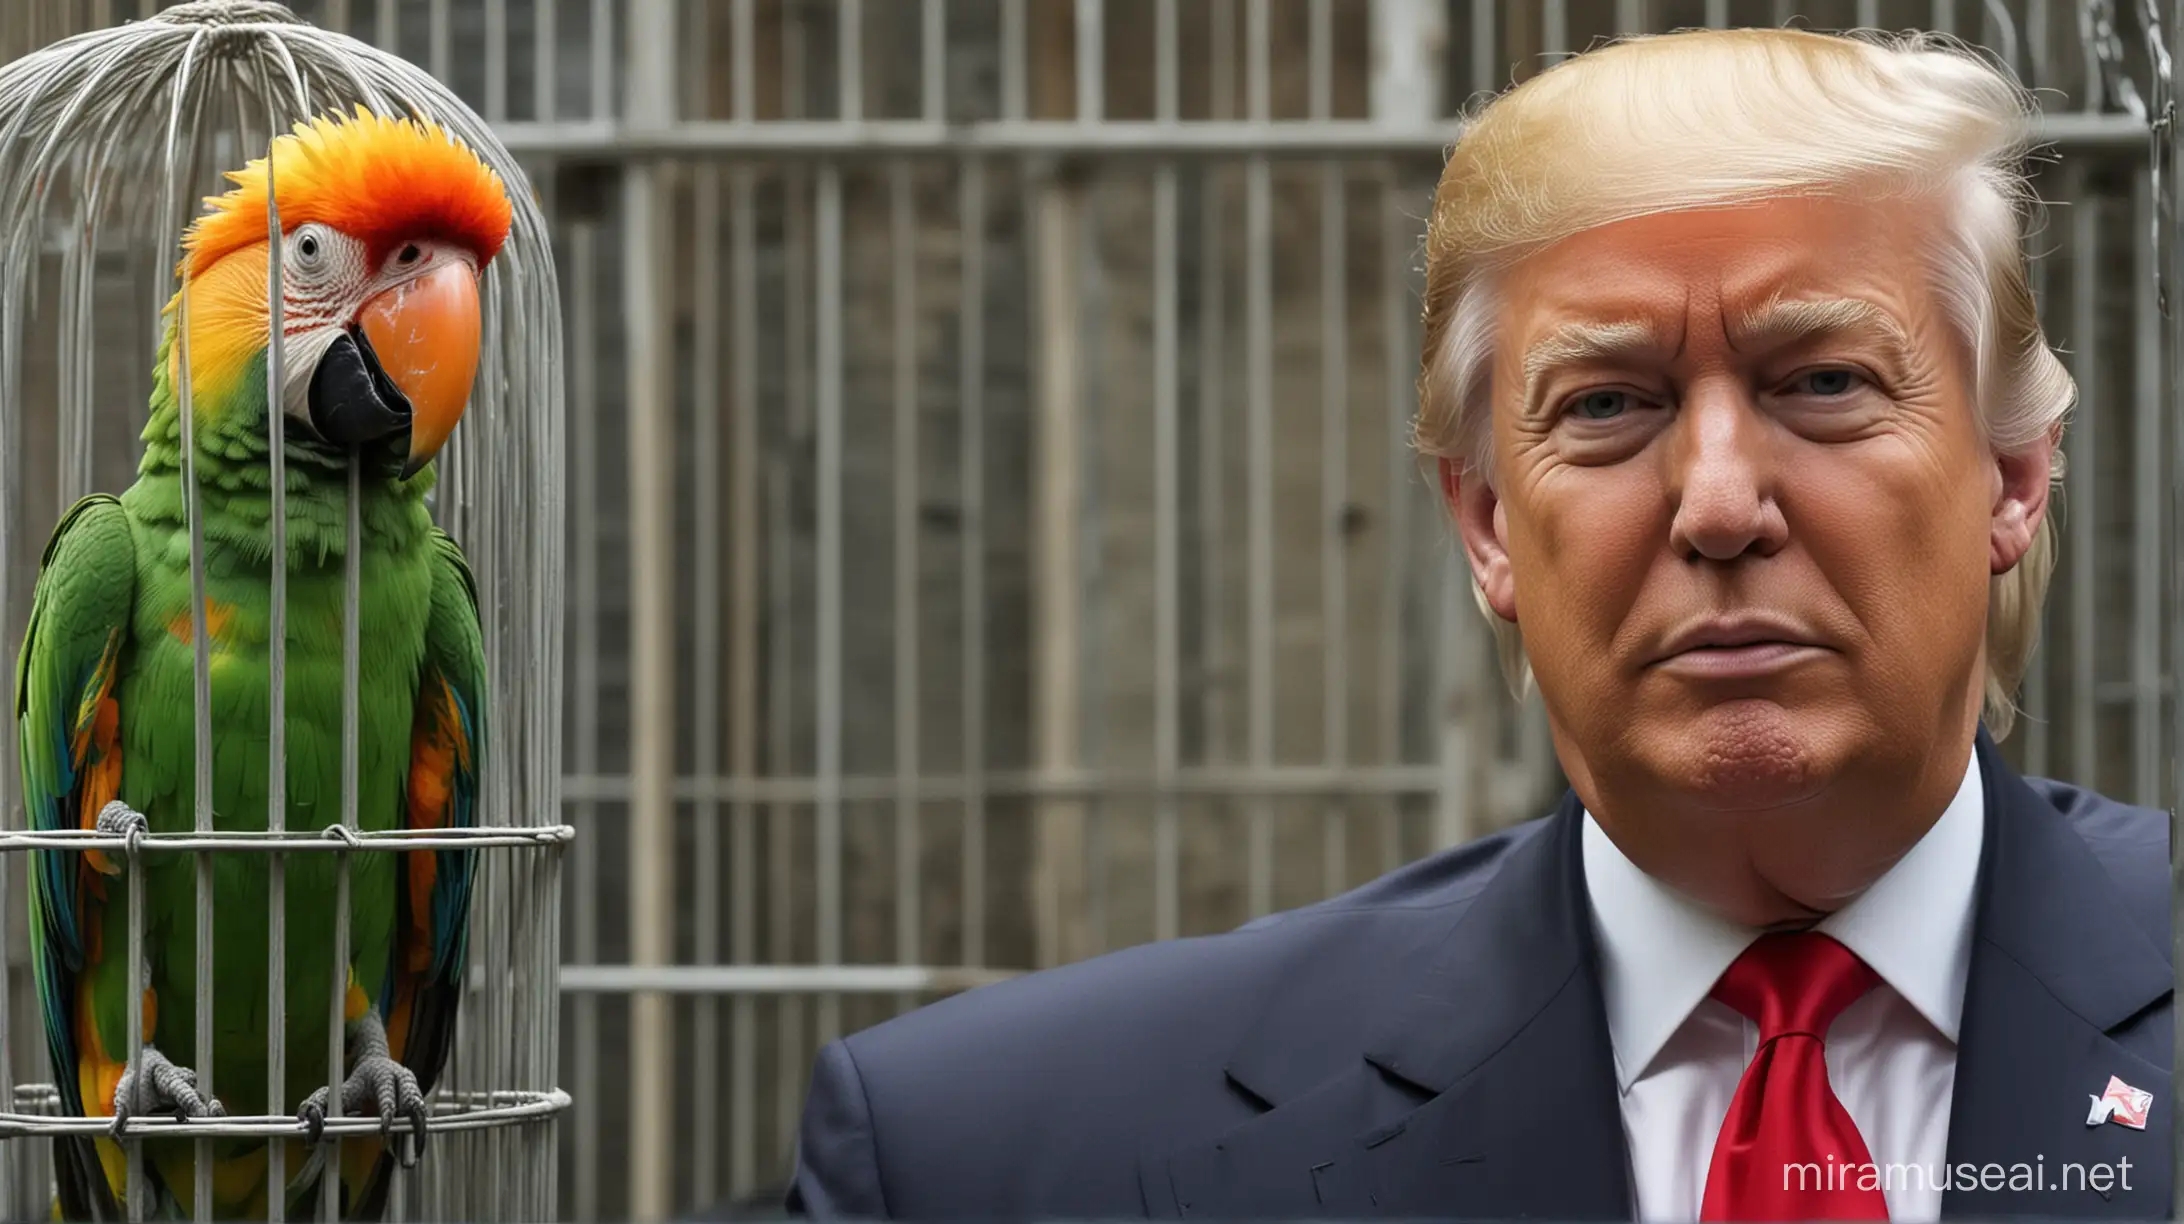 Donald Trump next to his caged parrot